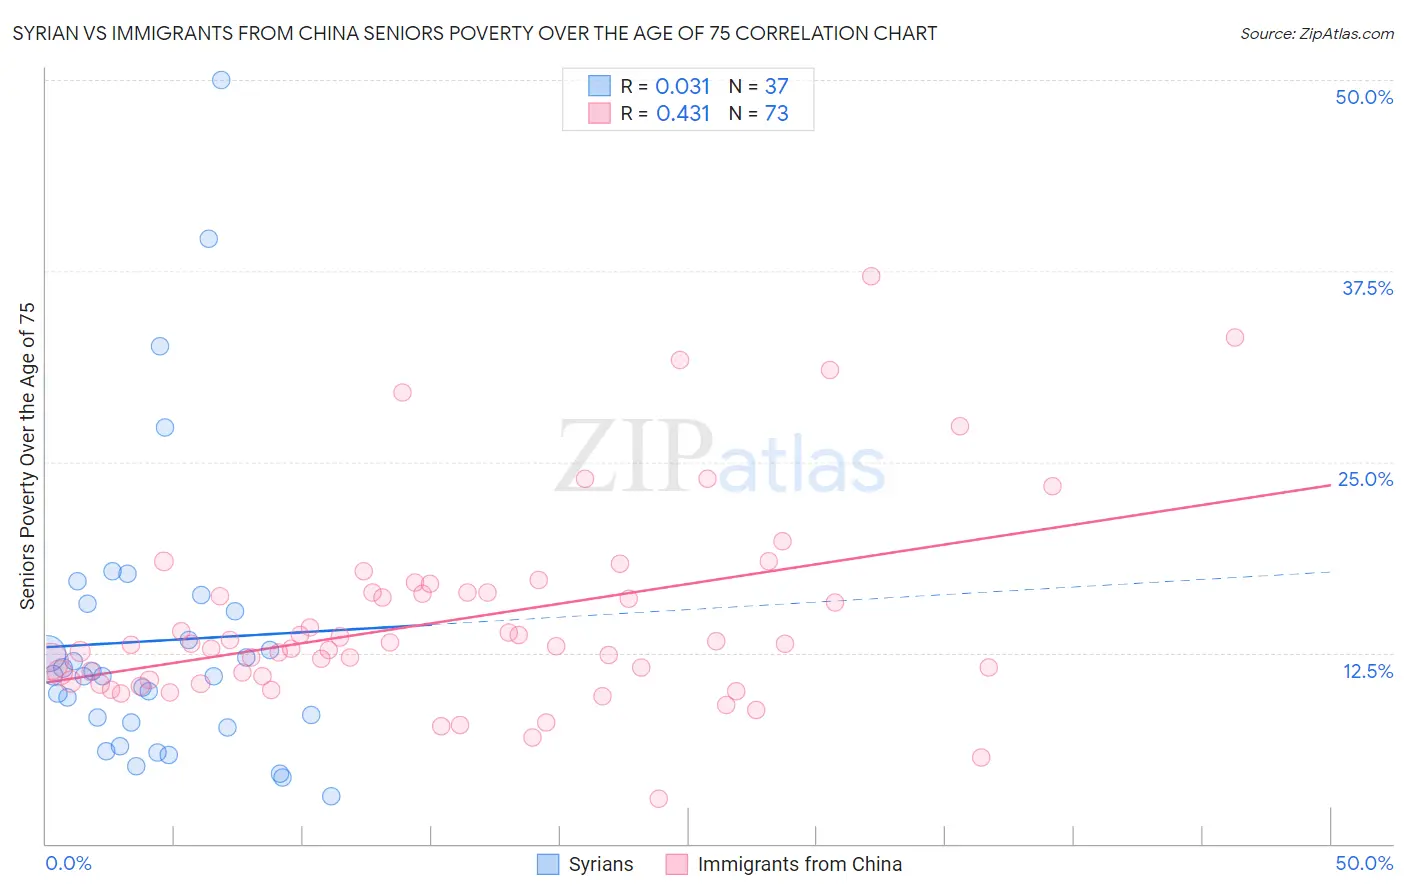 Syrian vs Immigrants from China Seniors Poverty Over the Age of 75